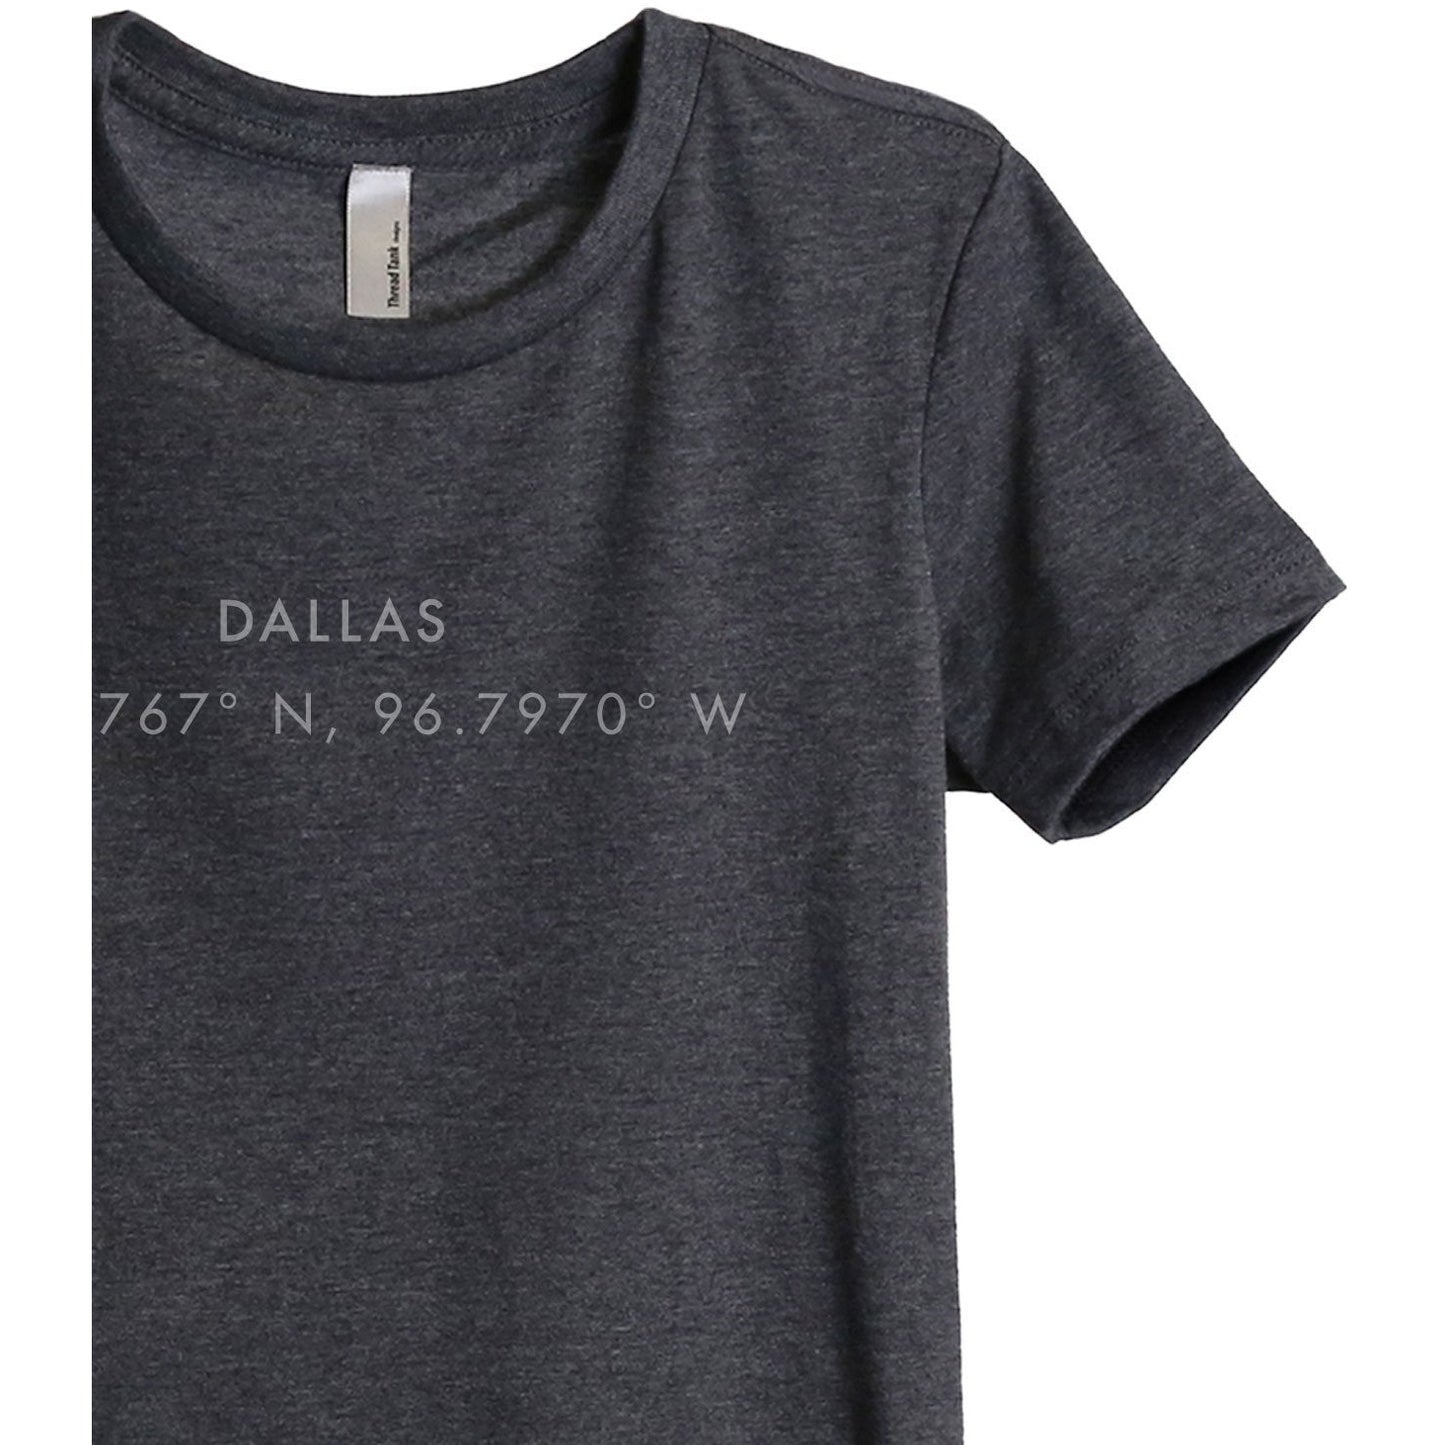 Dallas Texas Coordinates Women's Relaxed Crewneck T-Shirt Top Tee Charcoal Grey Zoom Details